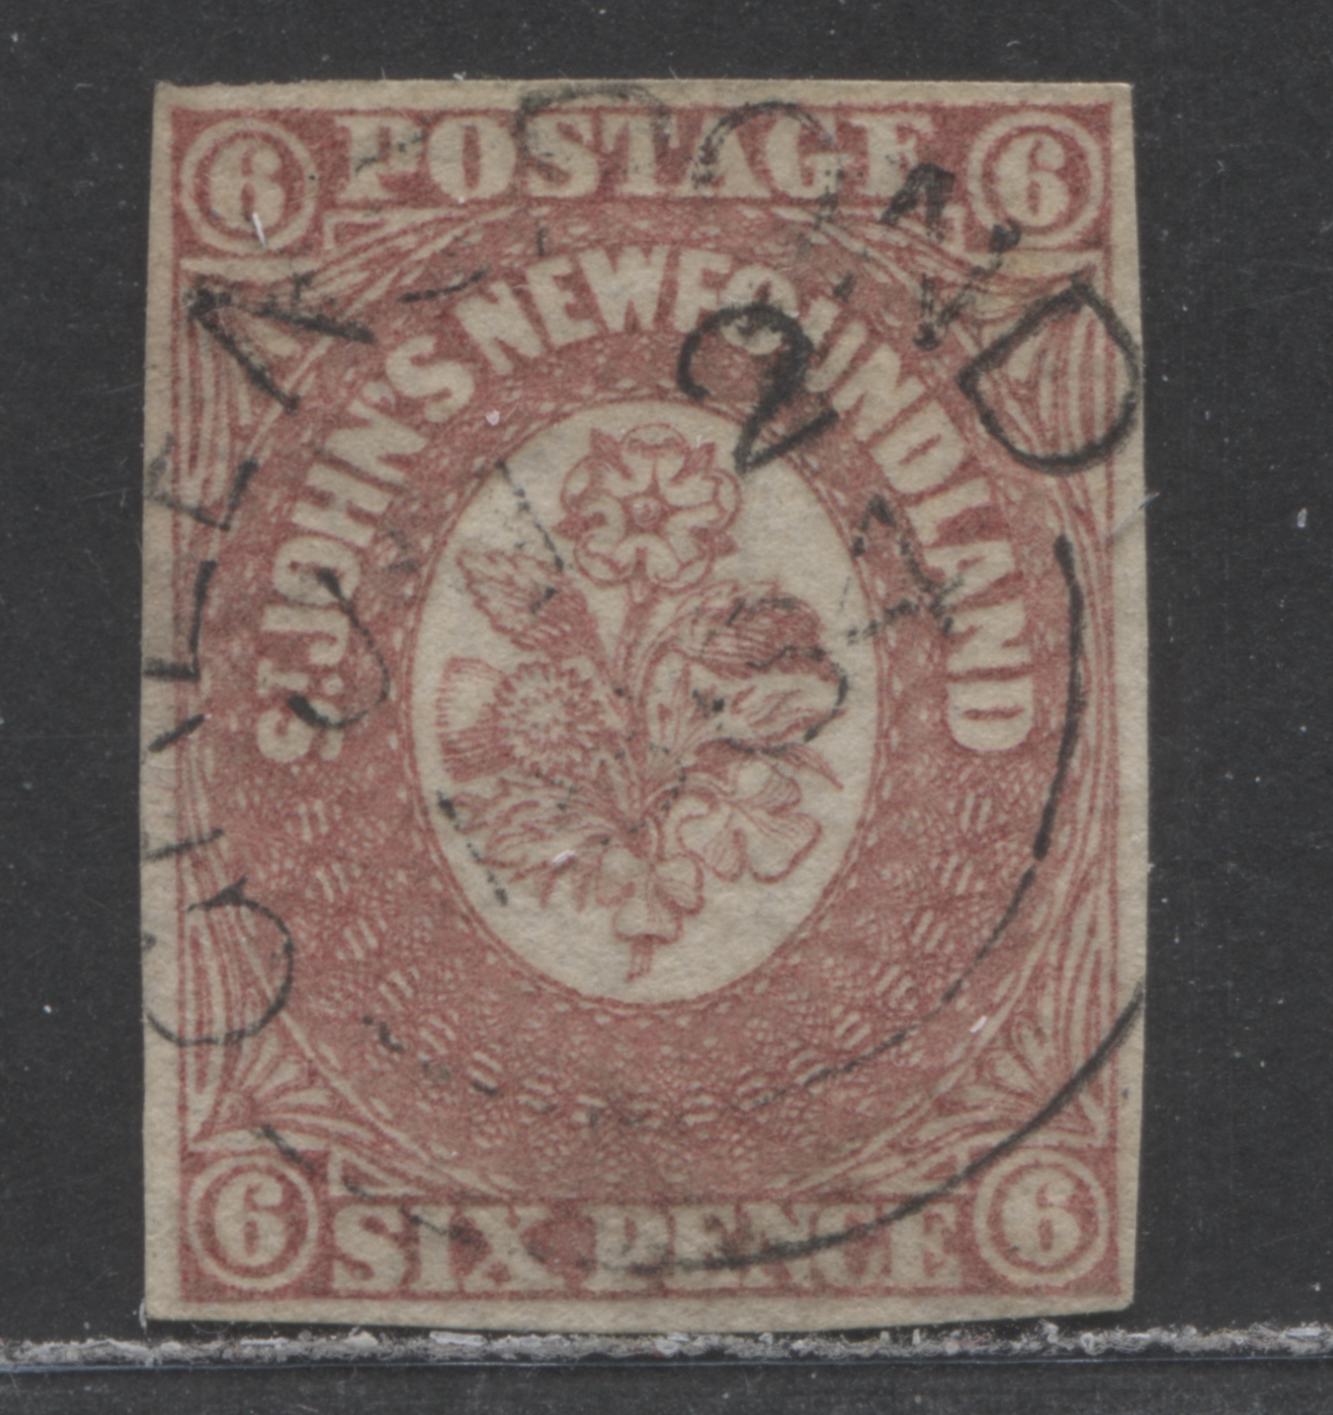 Lot 260 Newfoundland #20 6d Rose Flowers, 1861-1862 3rd Pence Issue, A Fine Used Single With Green Pond, June 2nd 1864 CDS Cancel, Scarce on This Issue